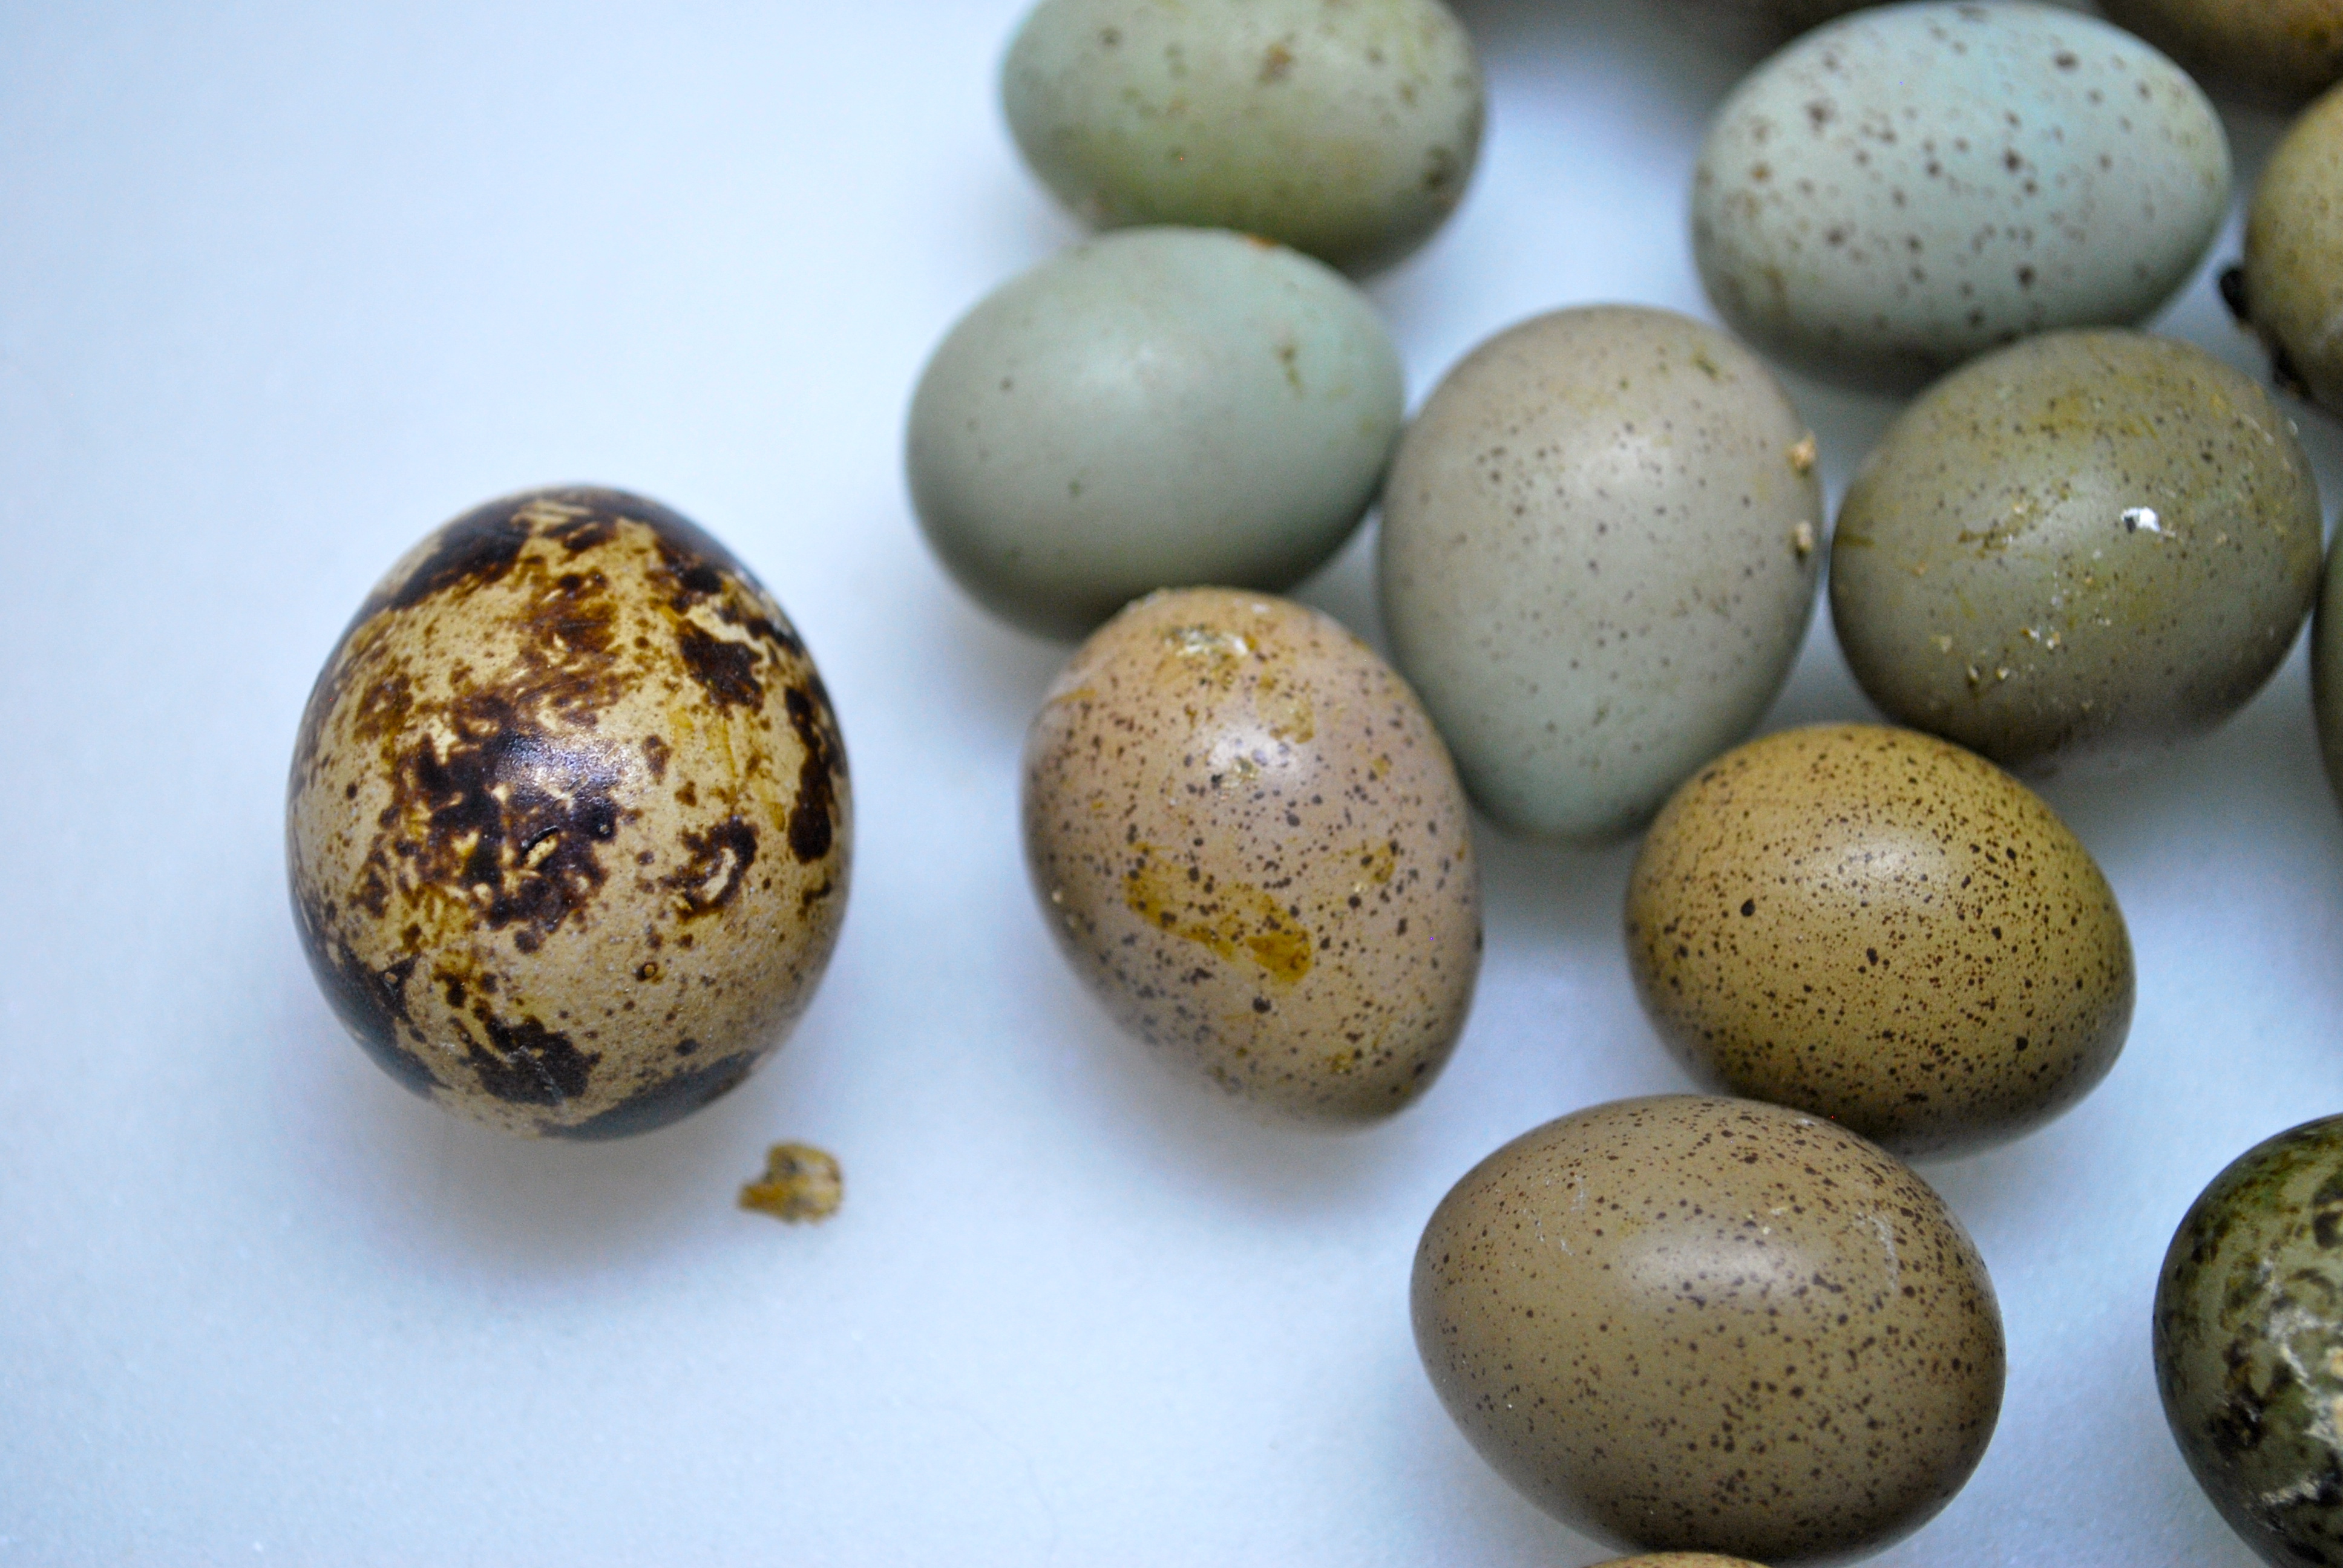 How long does it take for wild quail eggs to hatch?